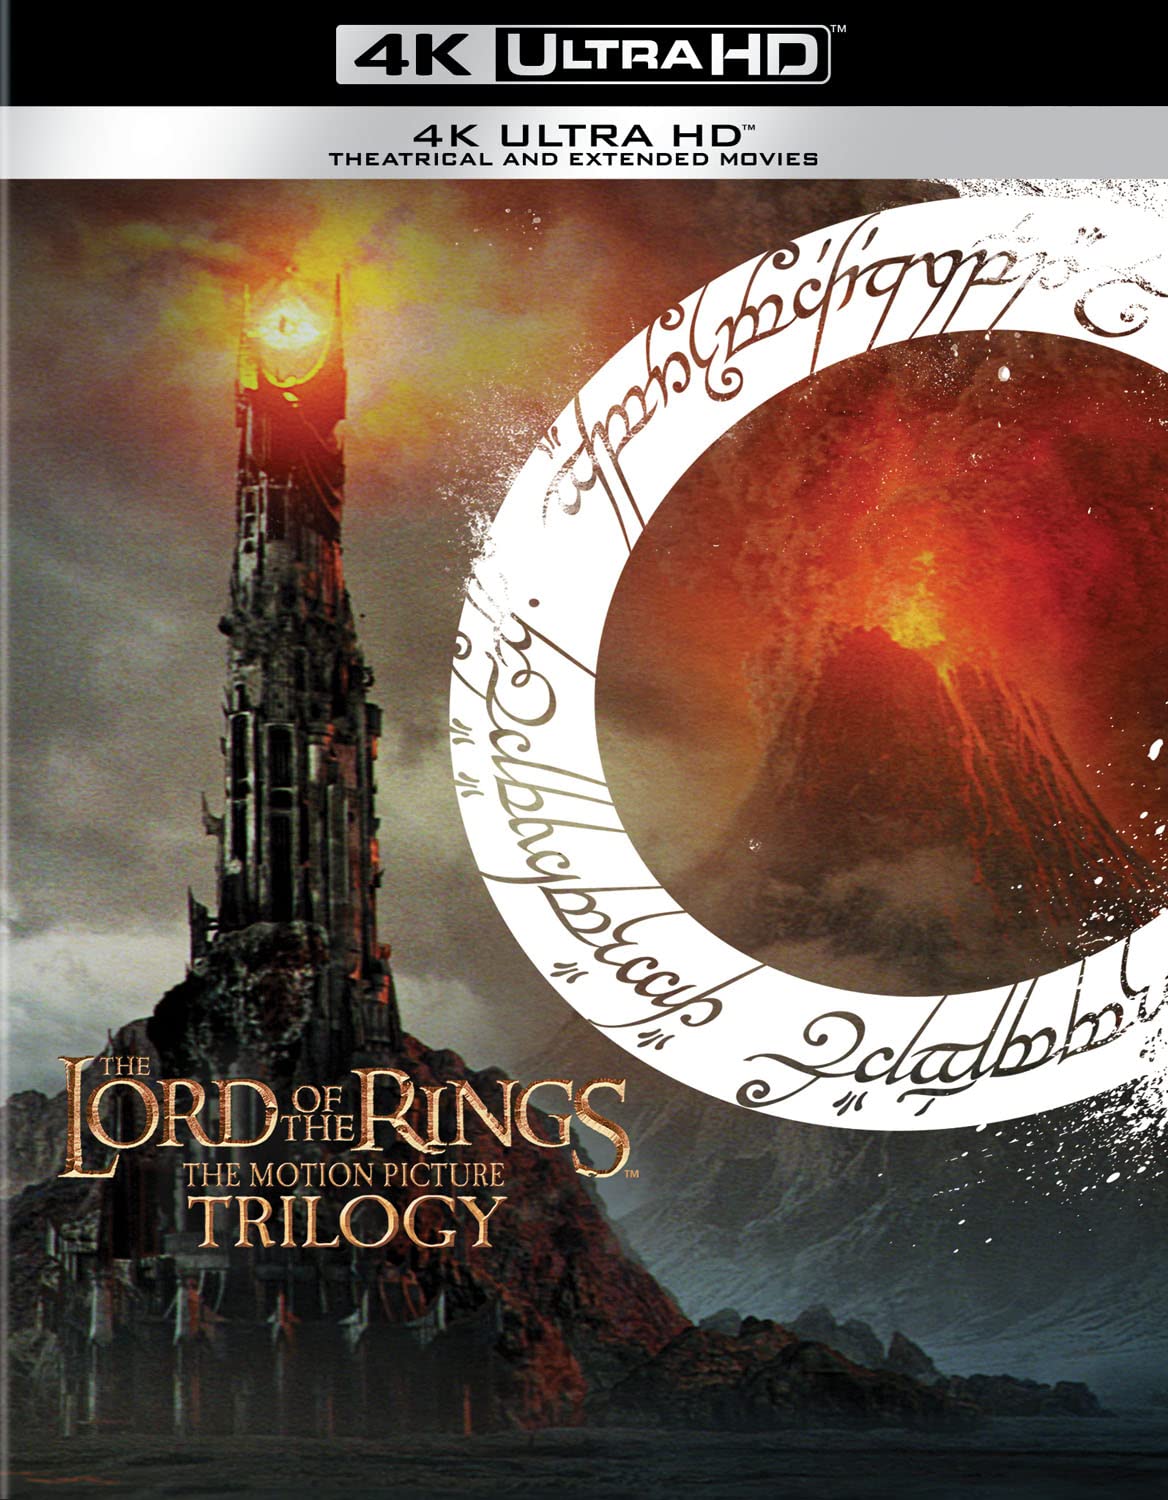 The Lord Of The Rings Trilogy: Extended Editions (4K Ultra HD + Blu-ray) - UHD [ 2003 ]  - Adventure Movies On 4K Ultra HD Blu-ray - Movies On GRUV